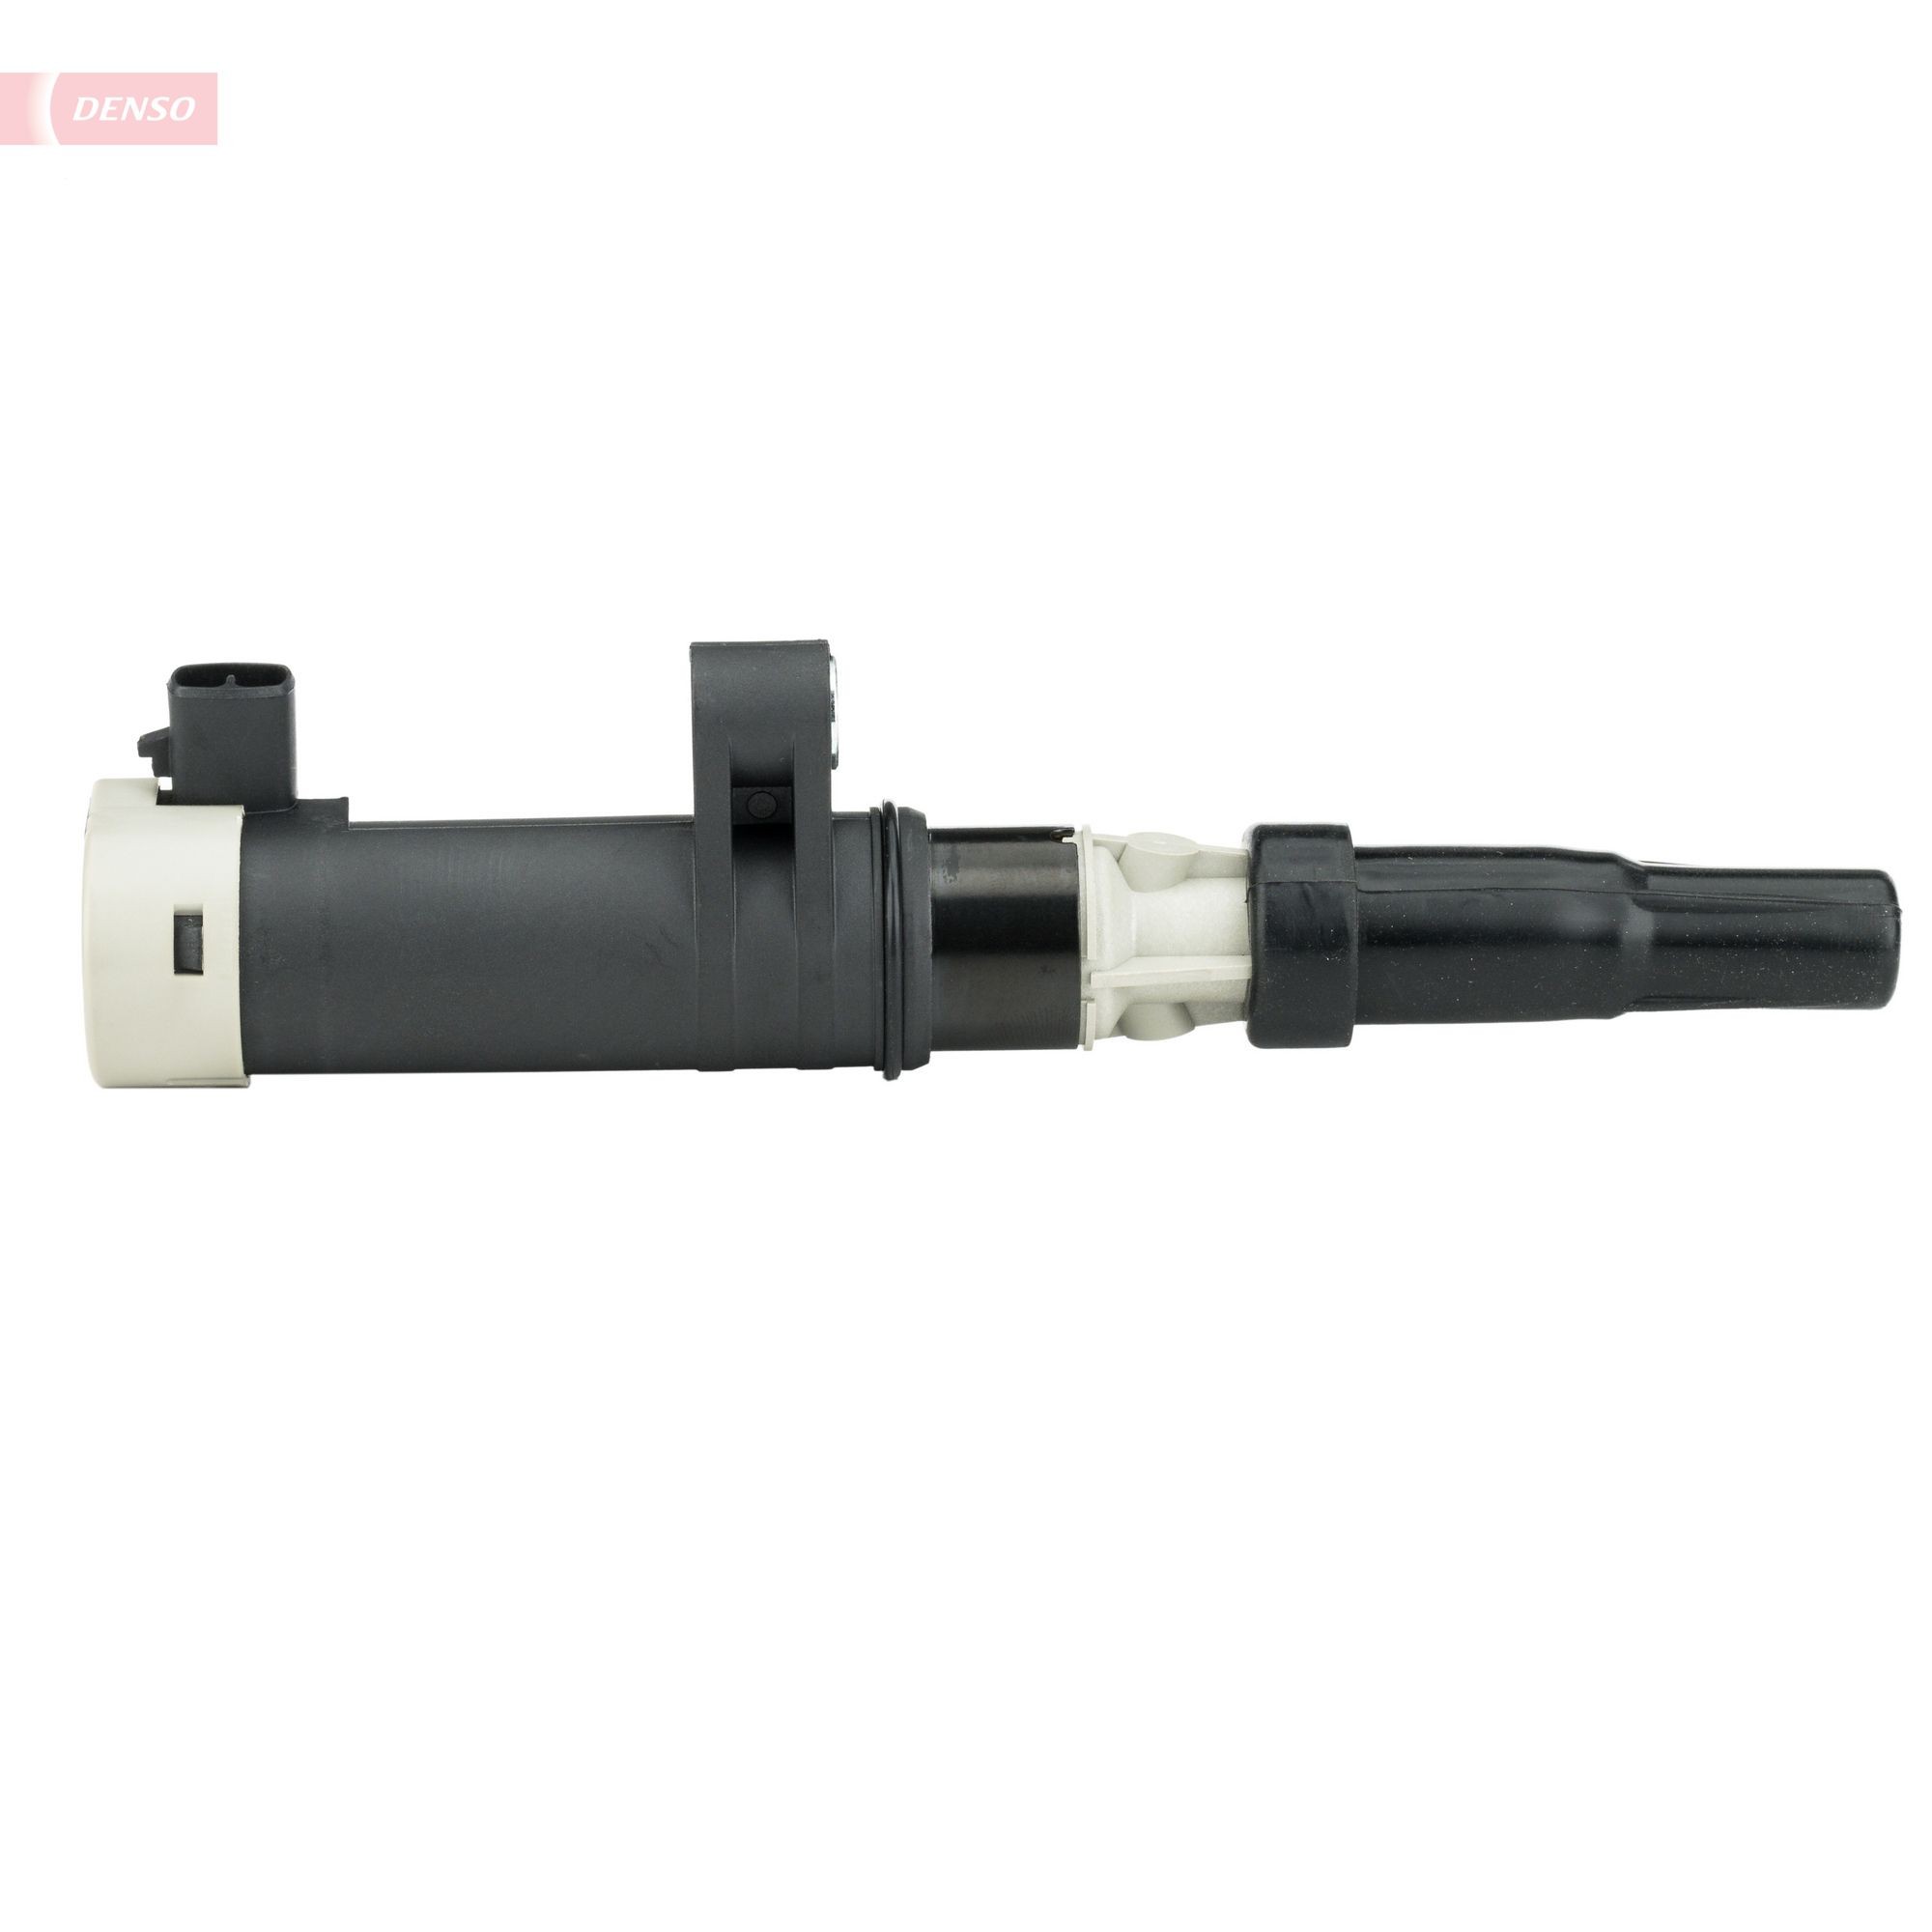 DENSO DIC-0218 Ignition coil 133800